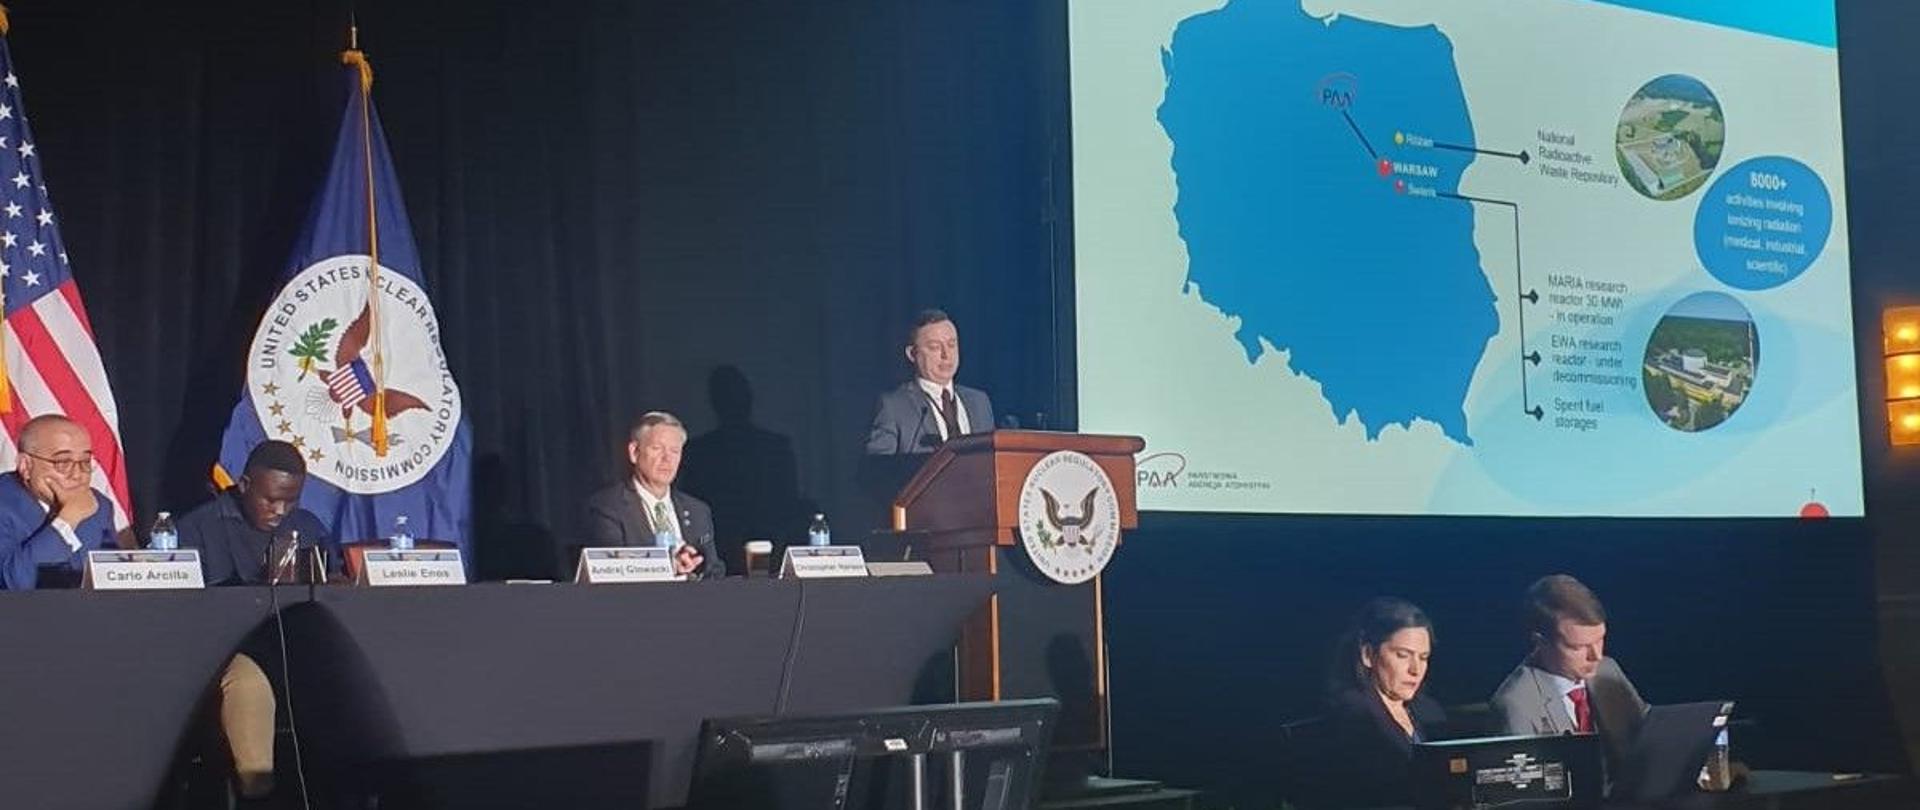 President Andrzej Głowacki took part in a panel discussion at the 36th International Conference of the United States Nuclear Regulatory Commission